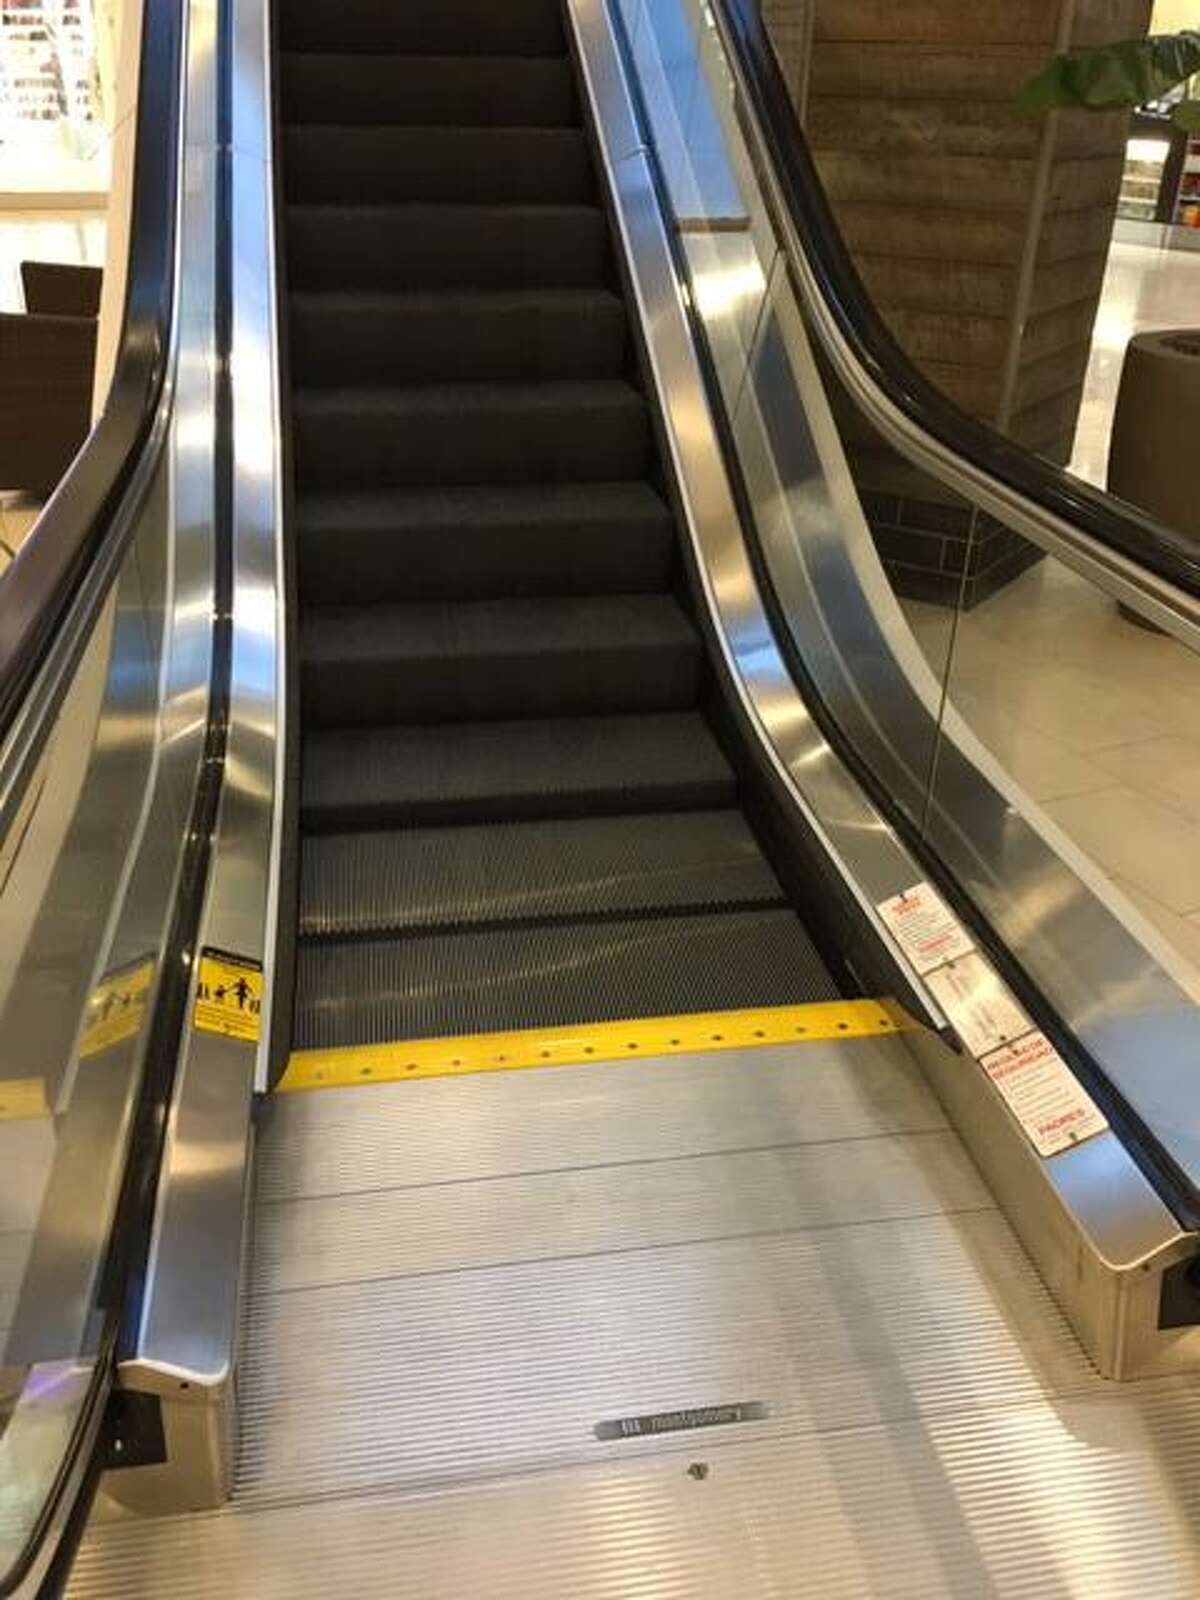 Toddler Injured After Getting Hand Caught in Fashion Valley Mall Escalator  - Times of San Diego